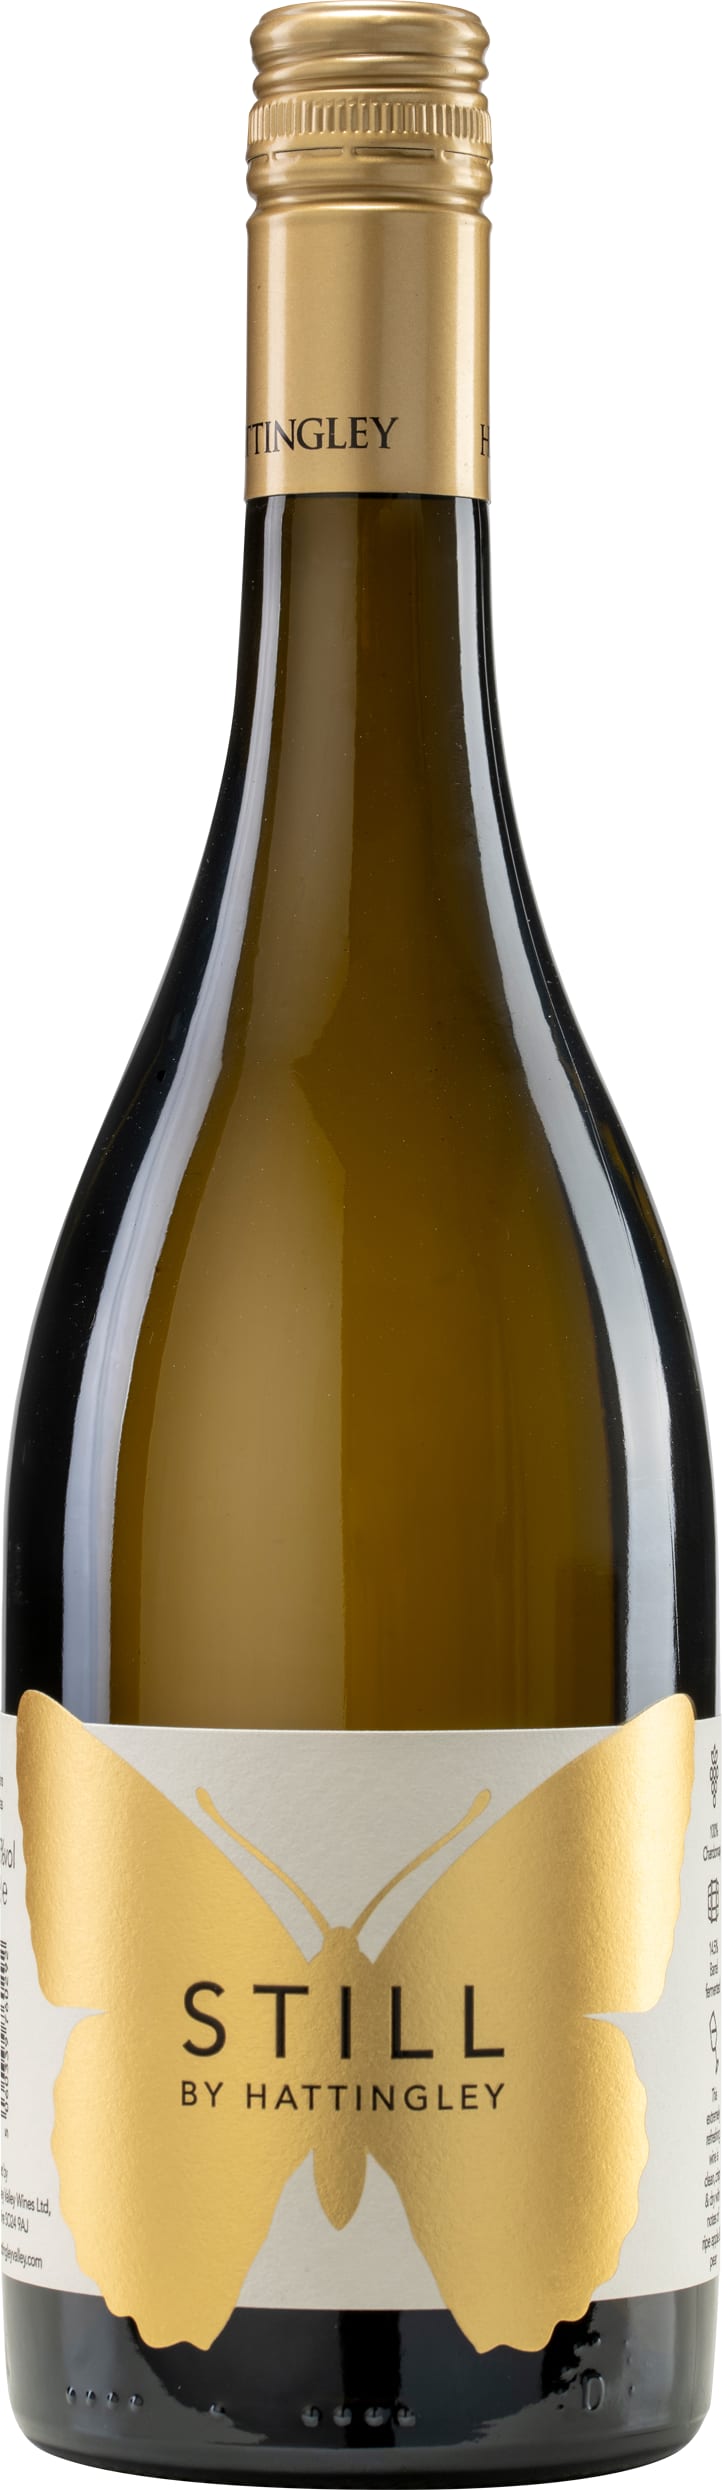 Hattingley Valley Chardonnay 2022 75cl - Buy Hattingley Valley Wines from GREAT WINES DIRECT wine shop